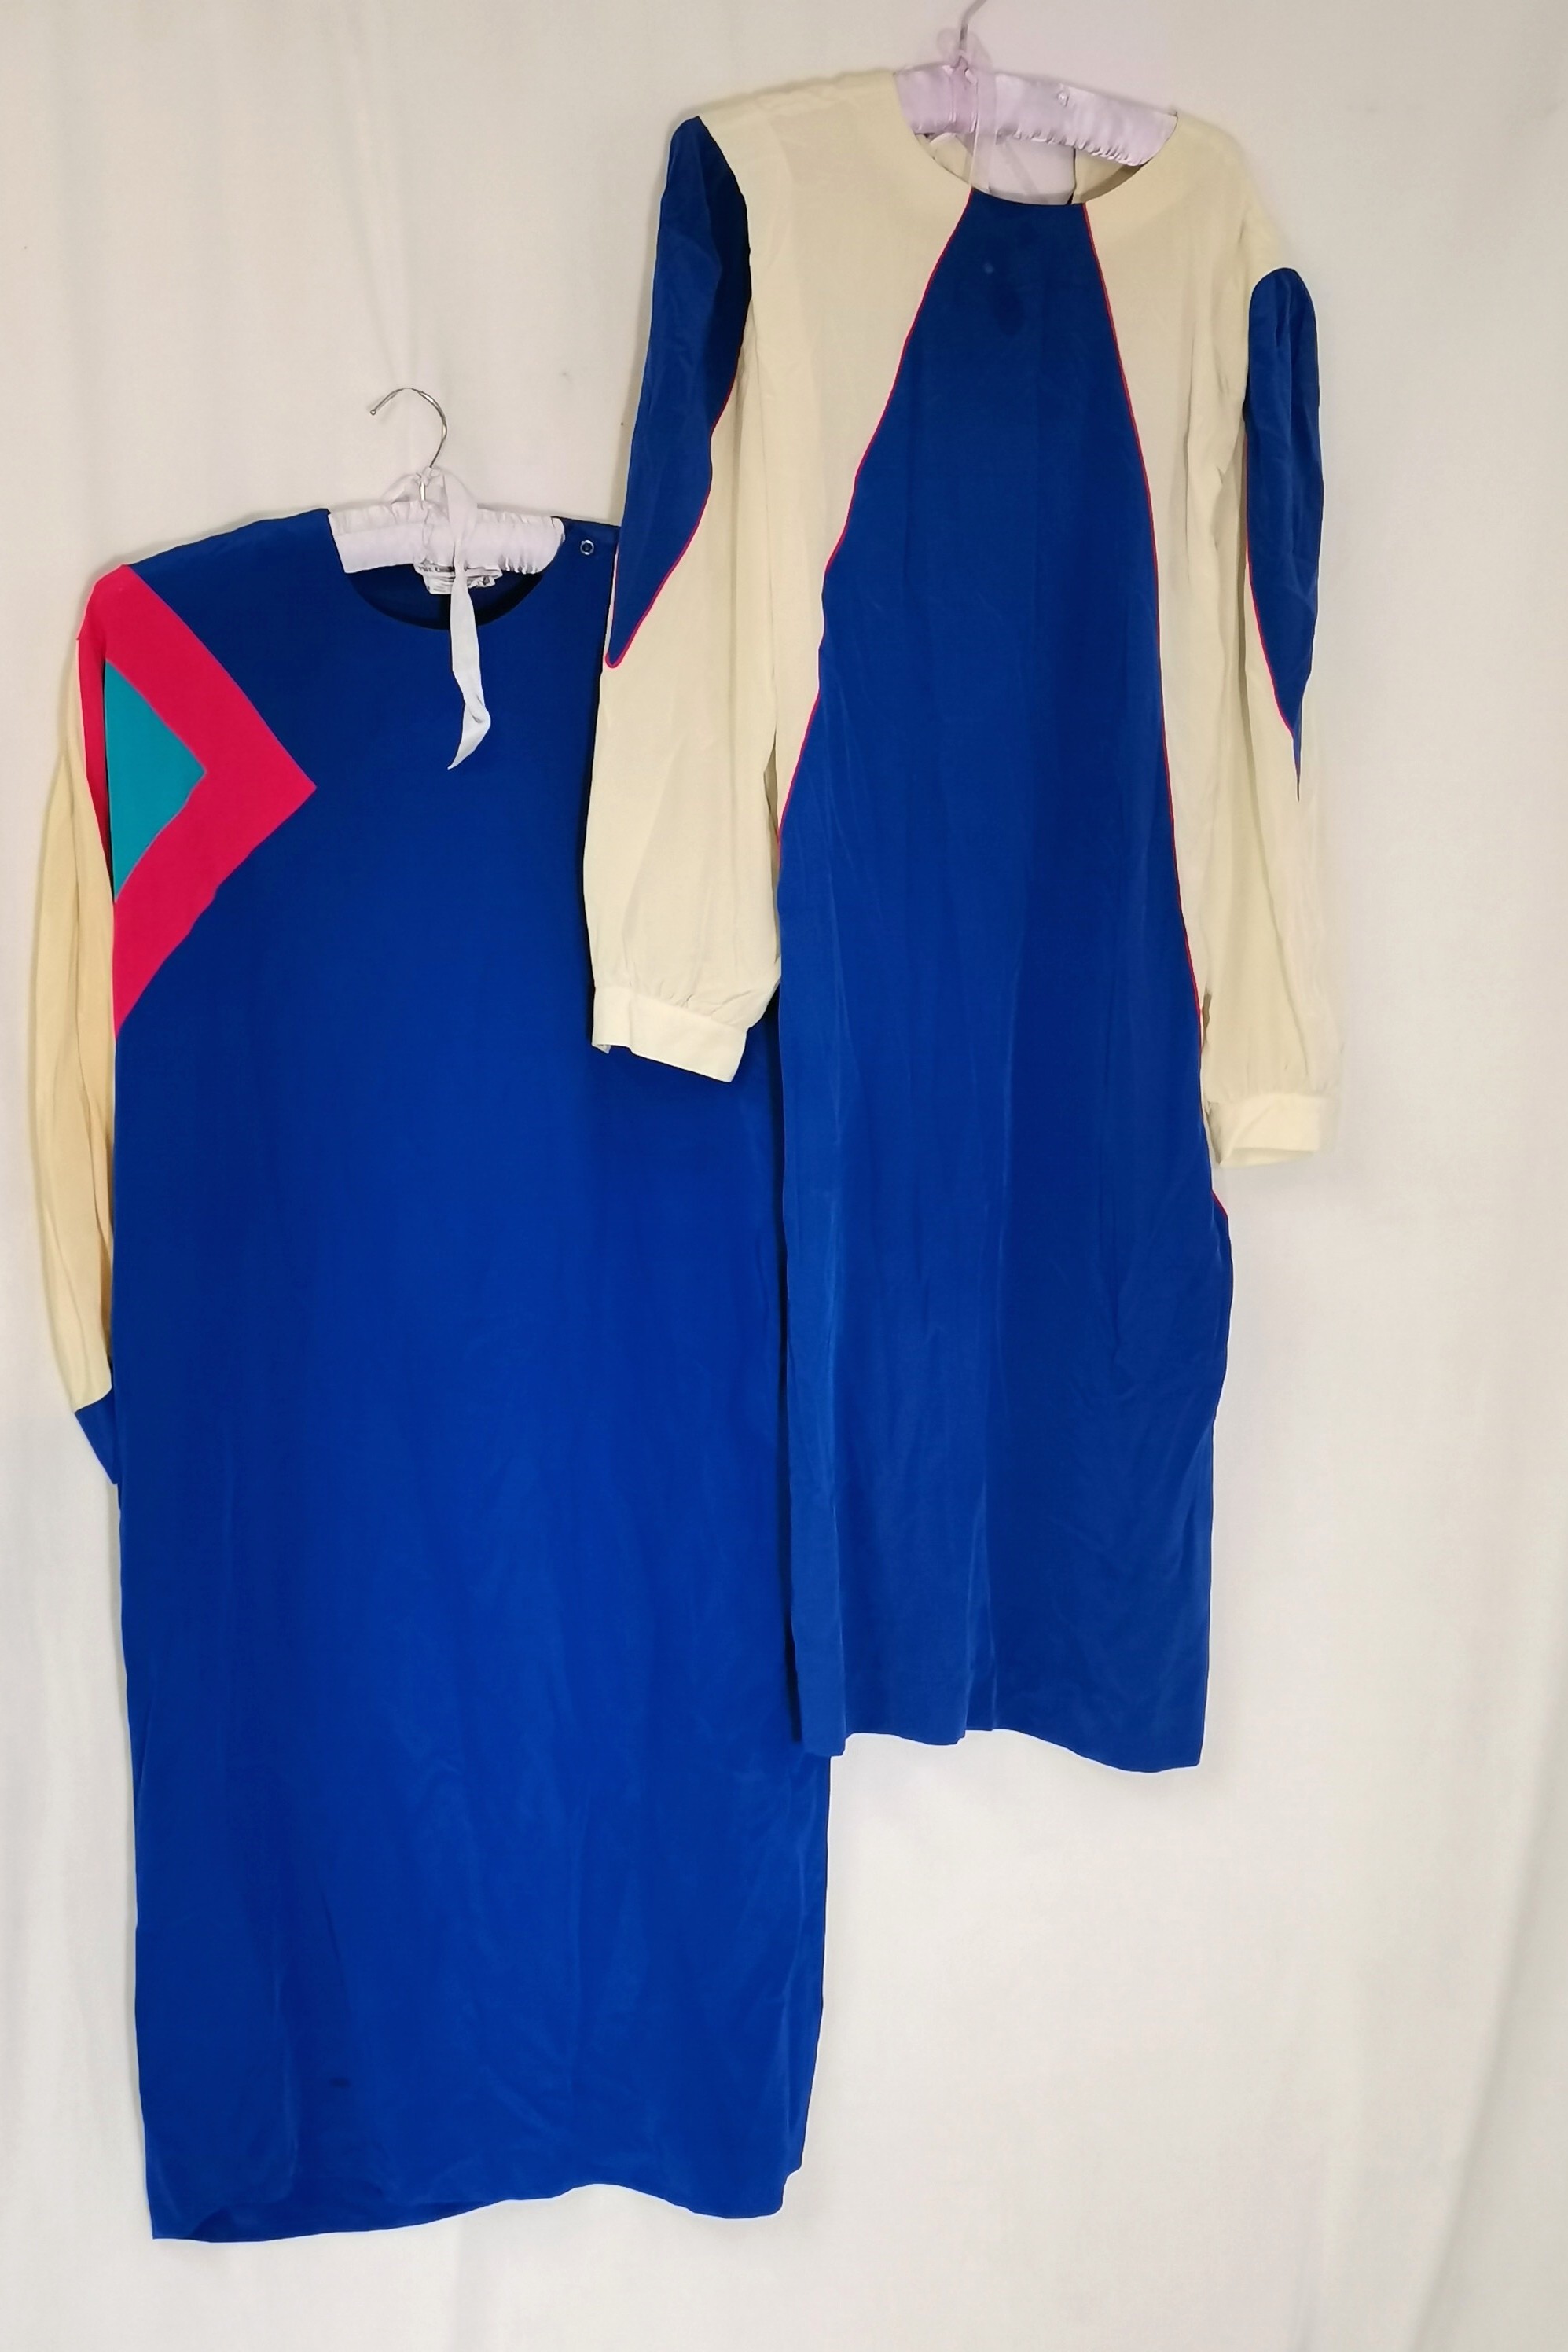 Vintage 2 1970s silk dresses 1 by The carriage trade both XL size - 1 has staining to the front